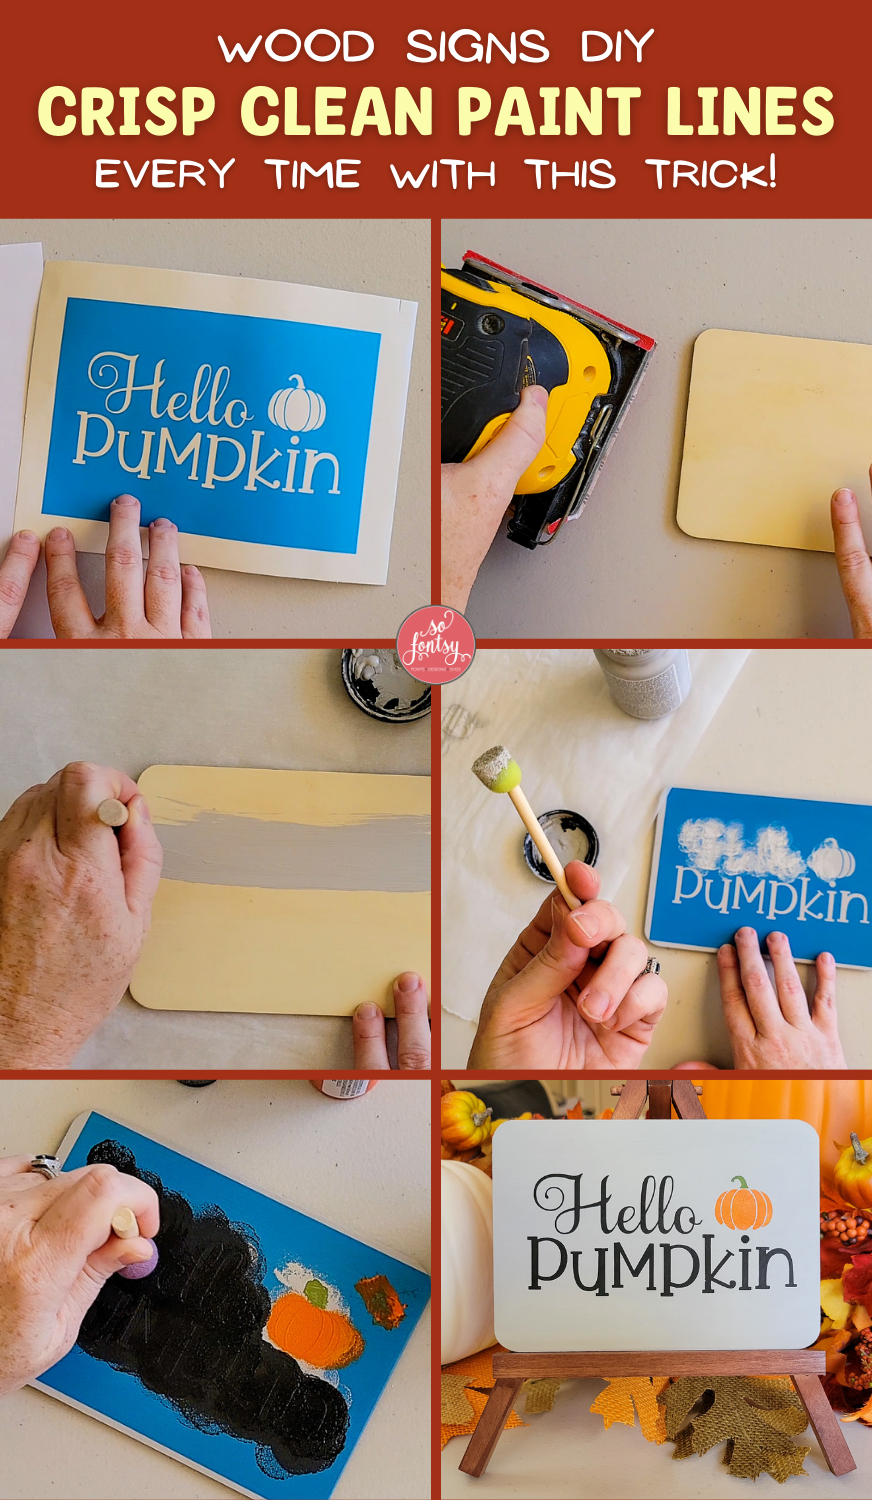 Clean Crisp Paint Lines on Wood Signs Every Time w/ This Trick